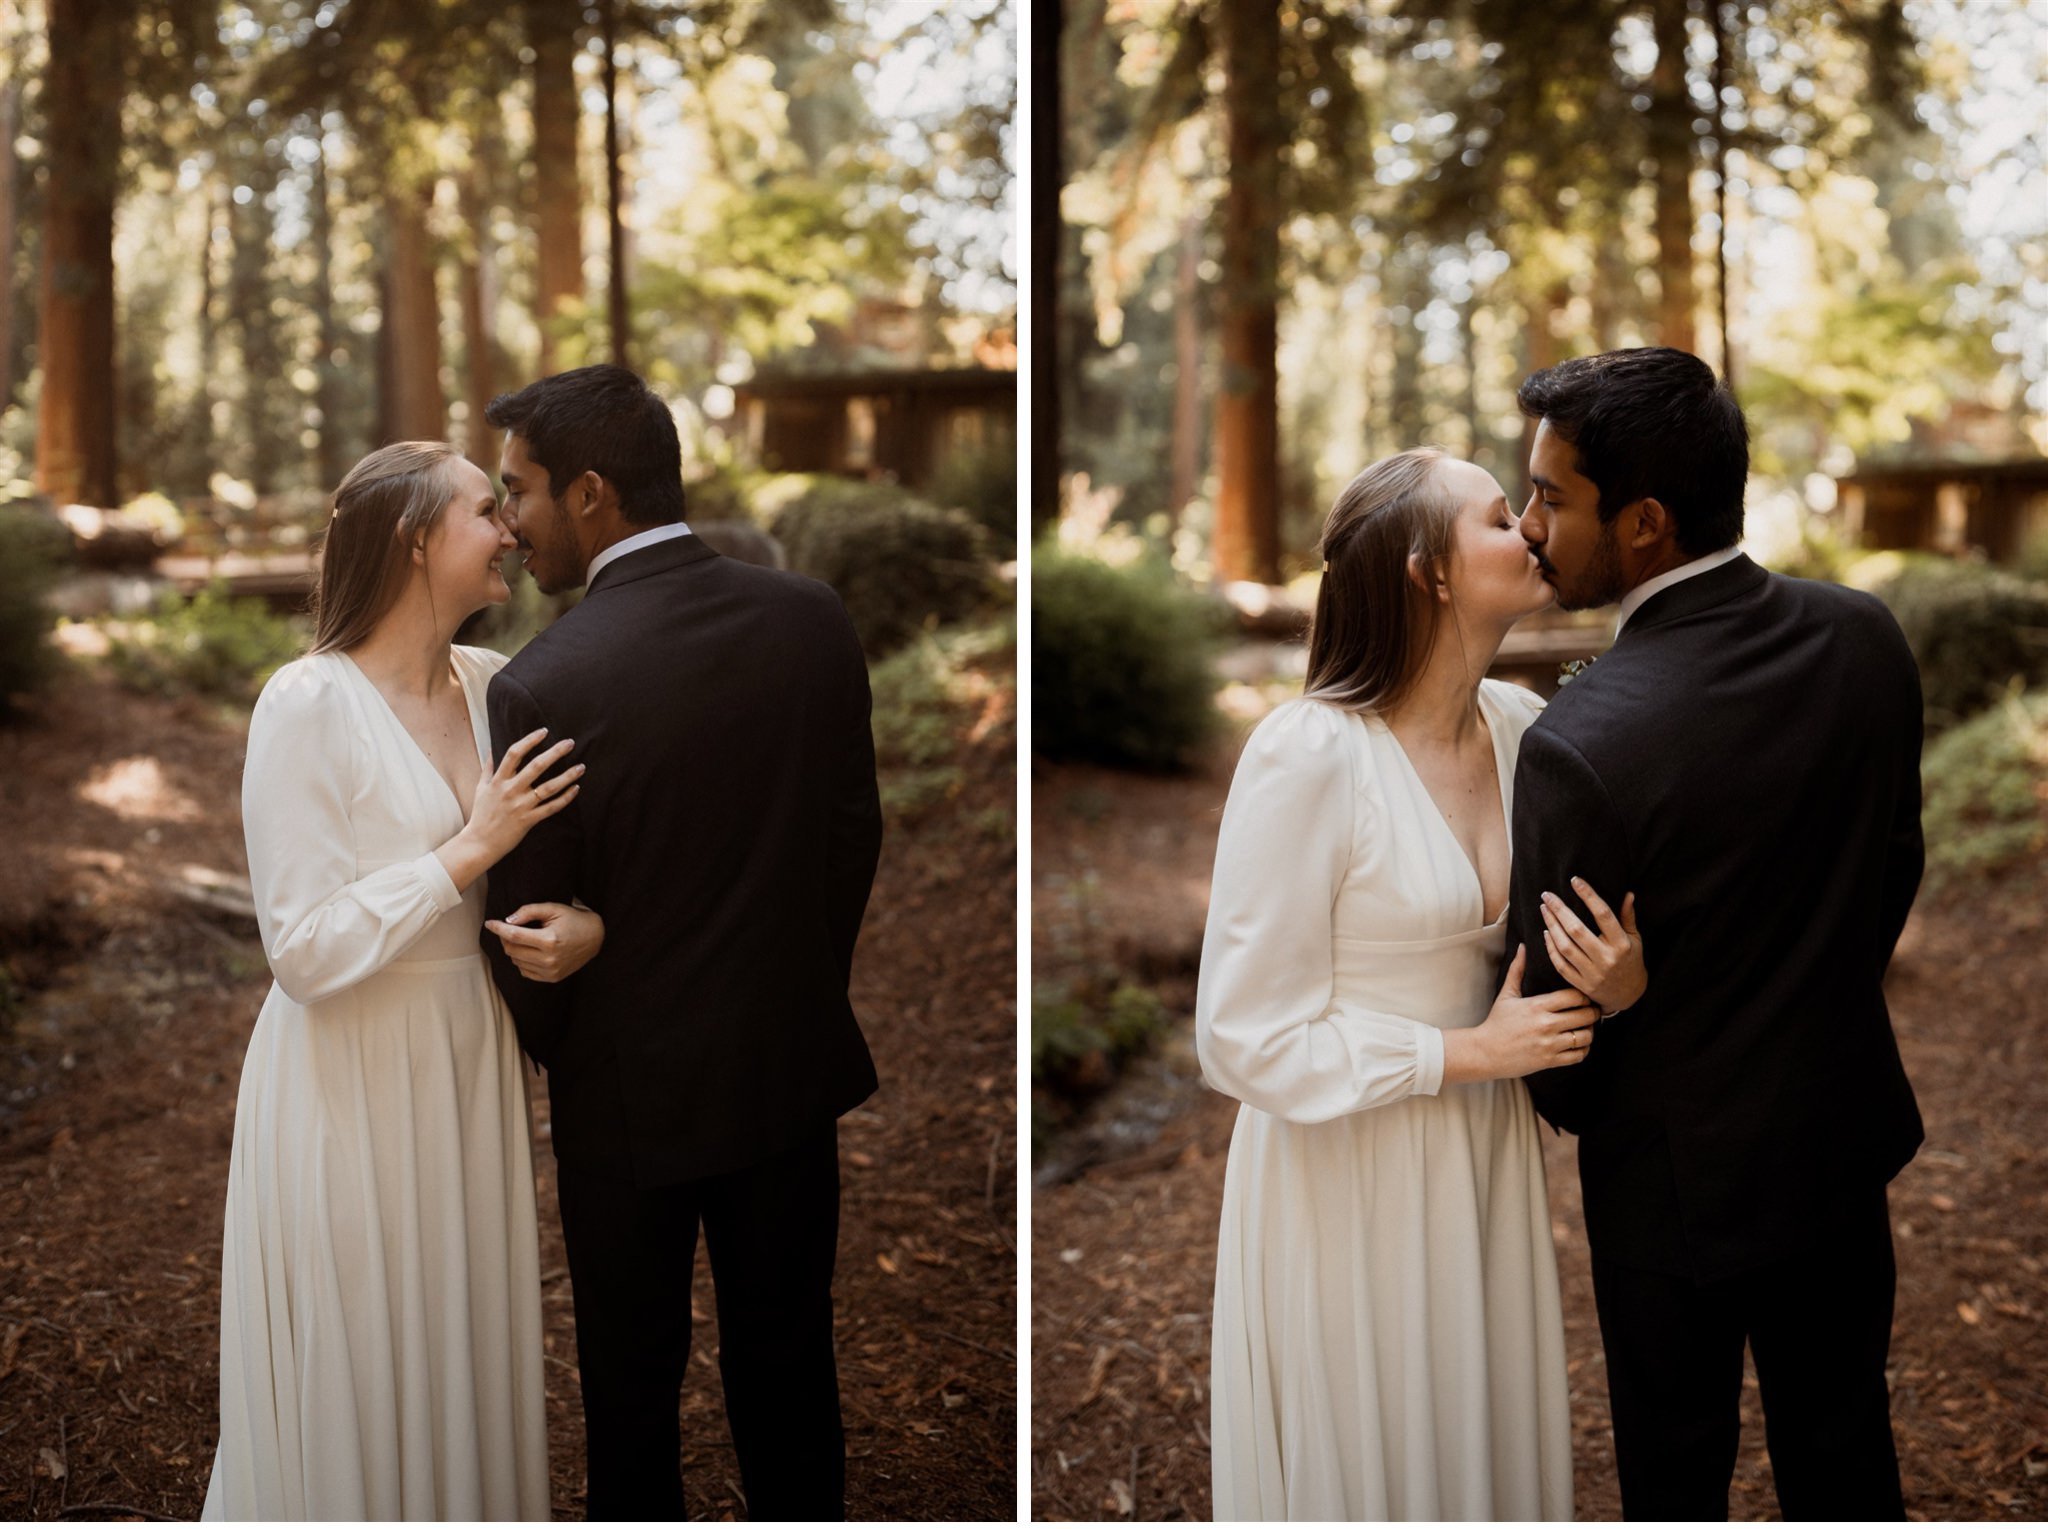 028_Two-Day Big Sur Redwoods Elopement with Family_Will Khoury Elopement Photographer.jpg